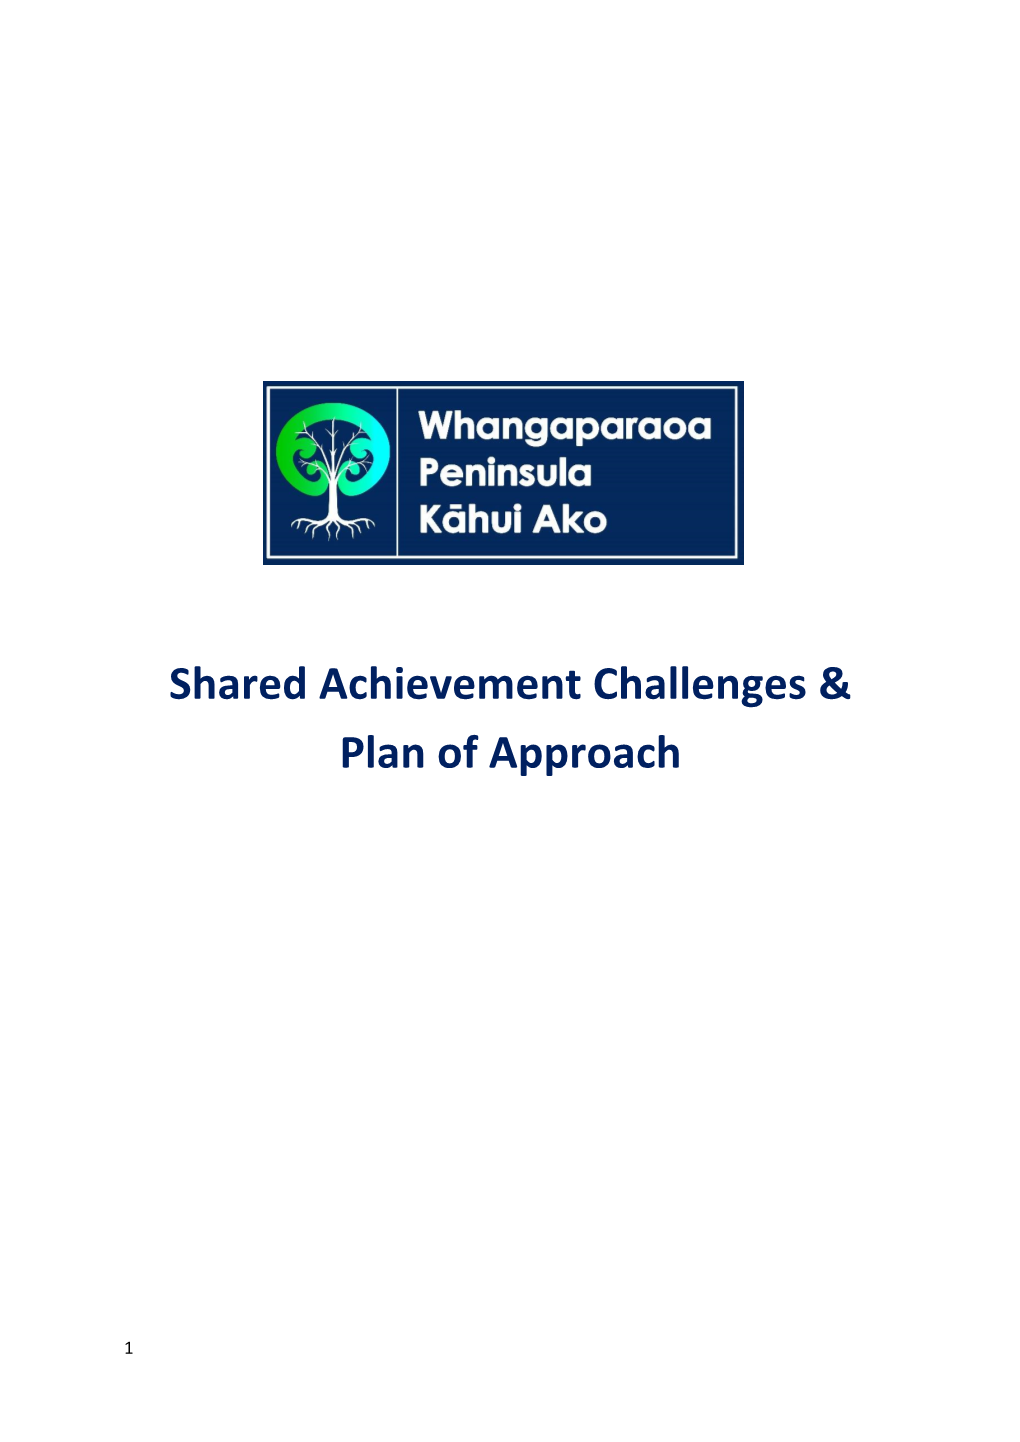 Shared Achievement Challenges & Plan of Approach